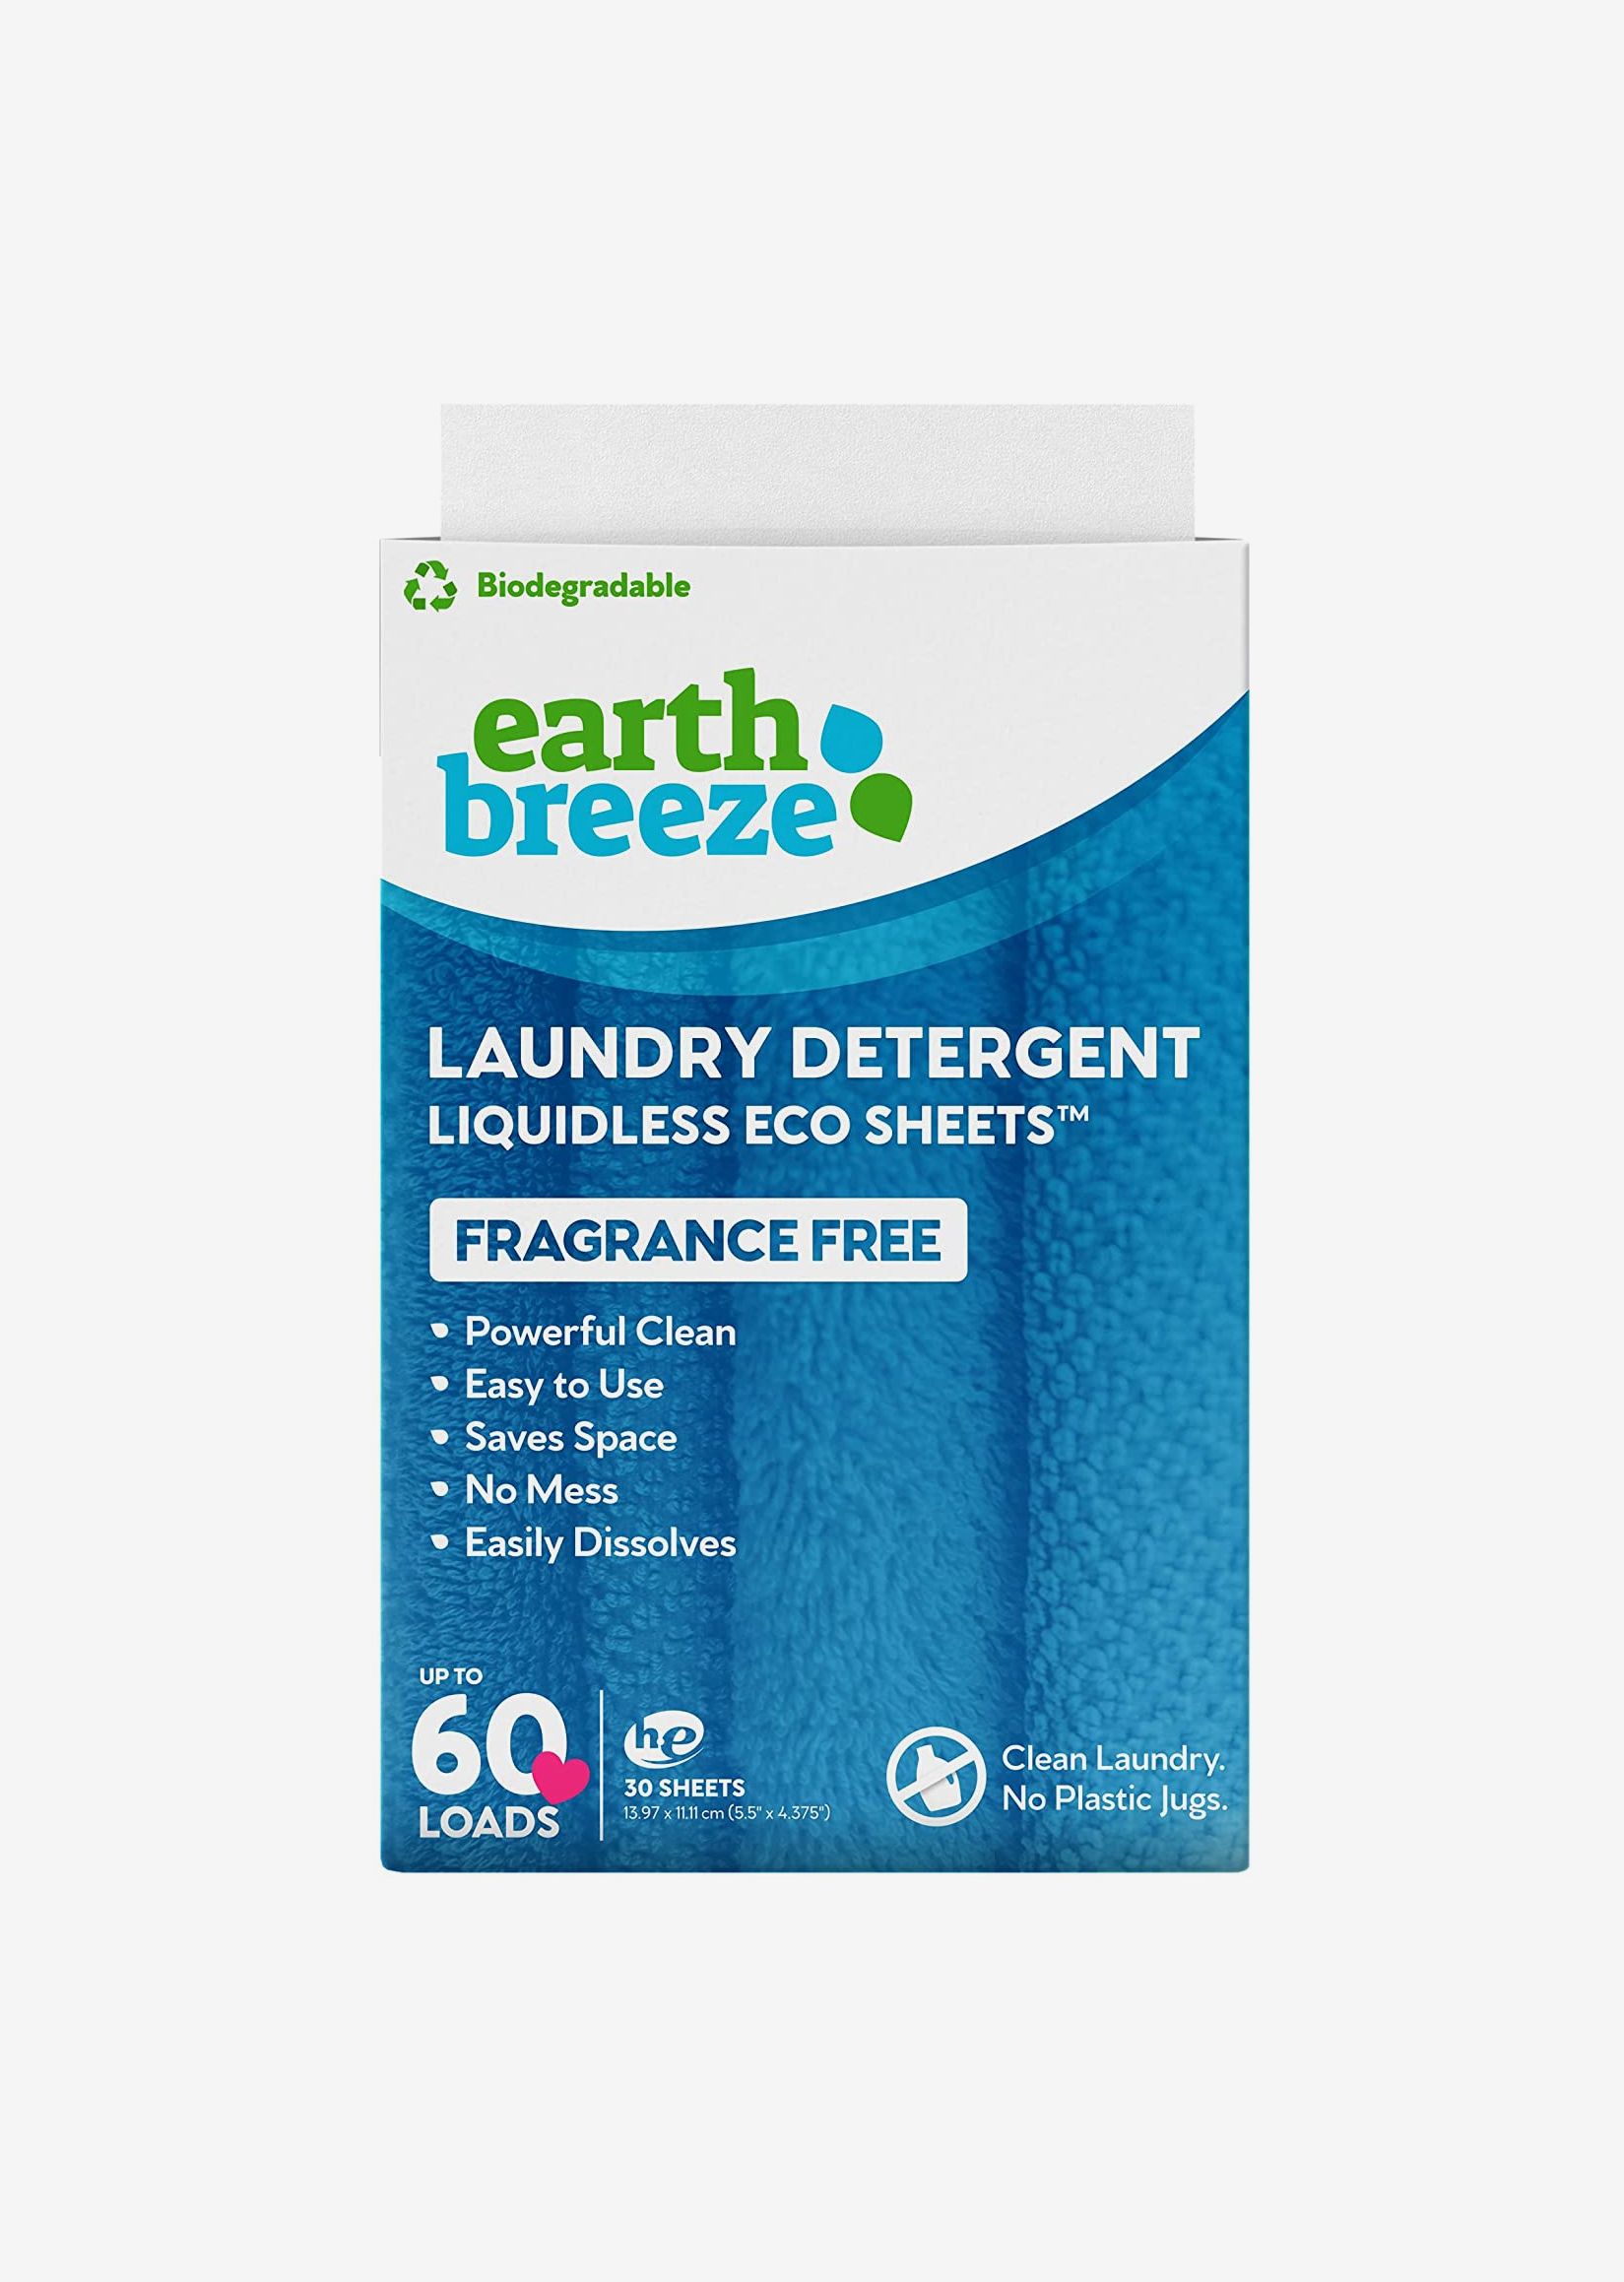 Laundry Detergent Sheets  Eco friendly & sustainable – Lucent Globe